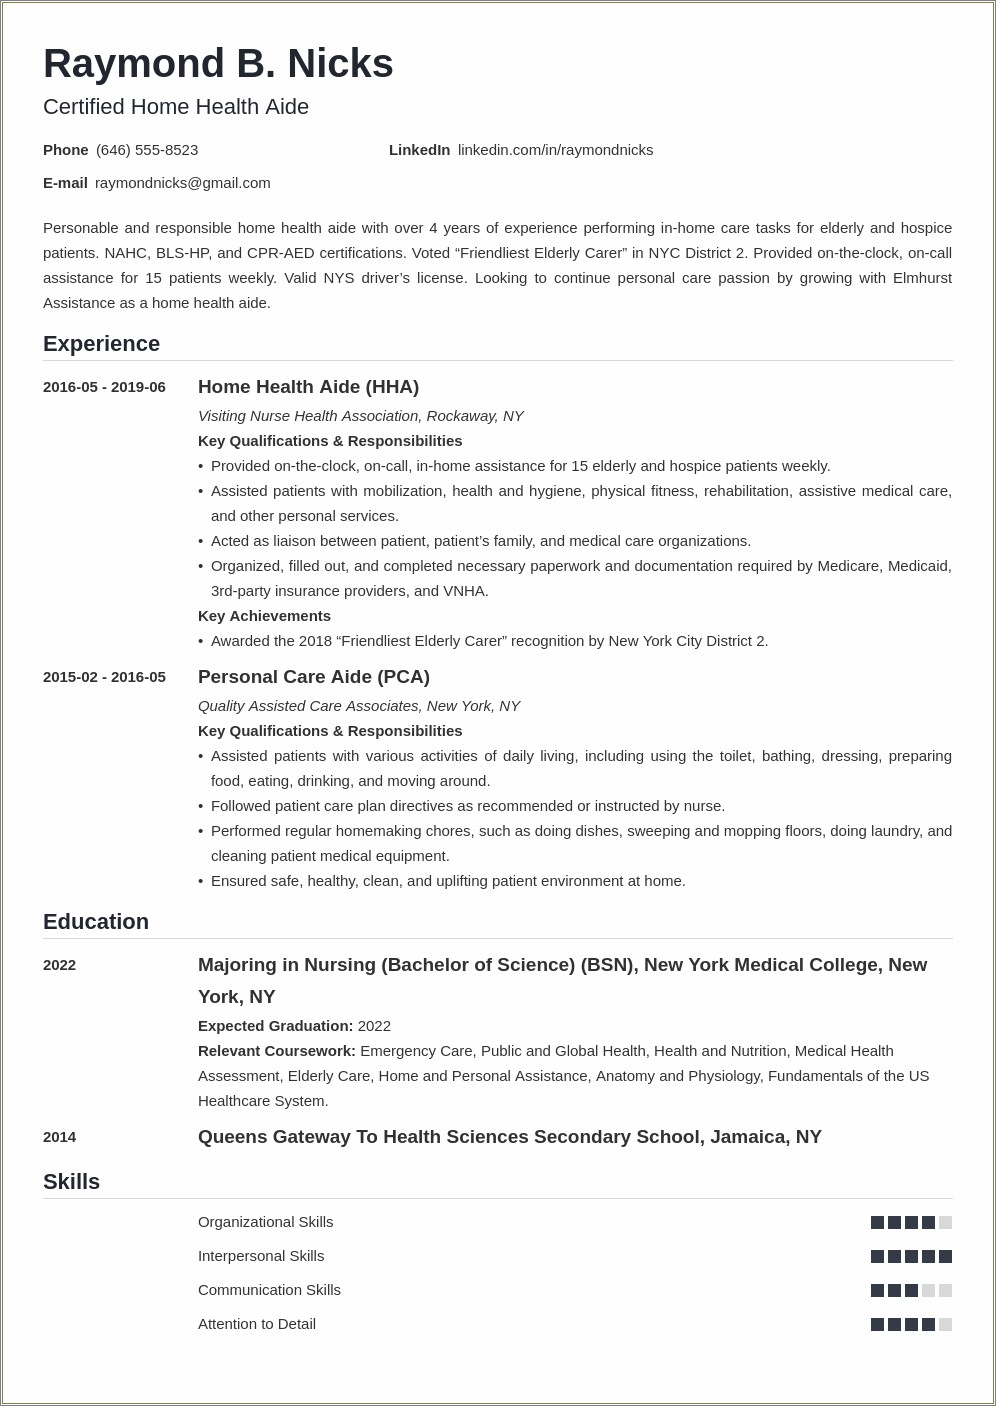 Resume Samples For Home Care Aide